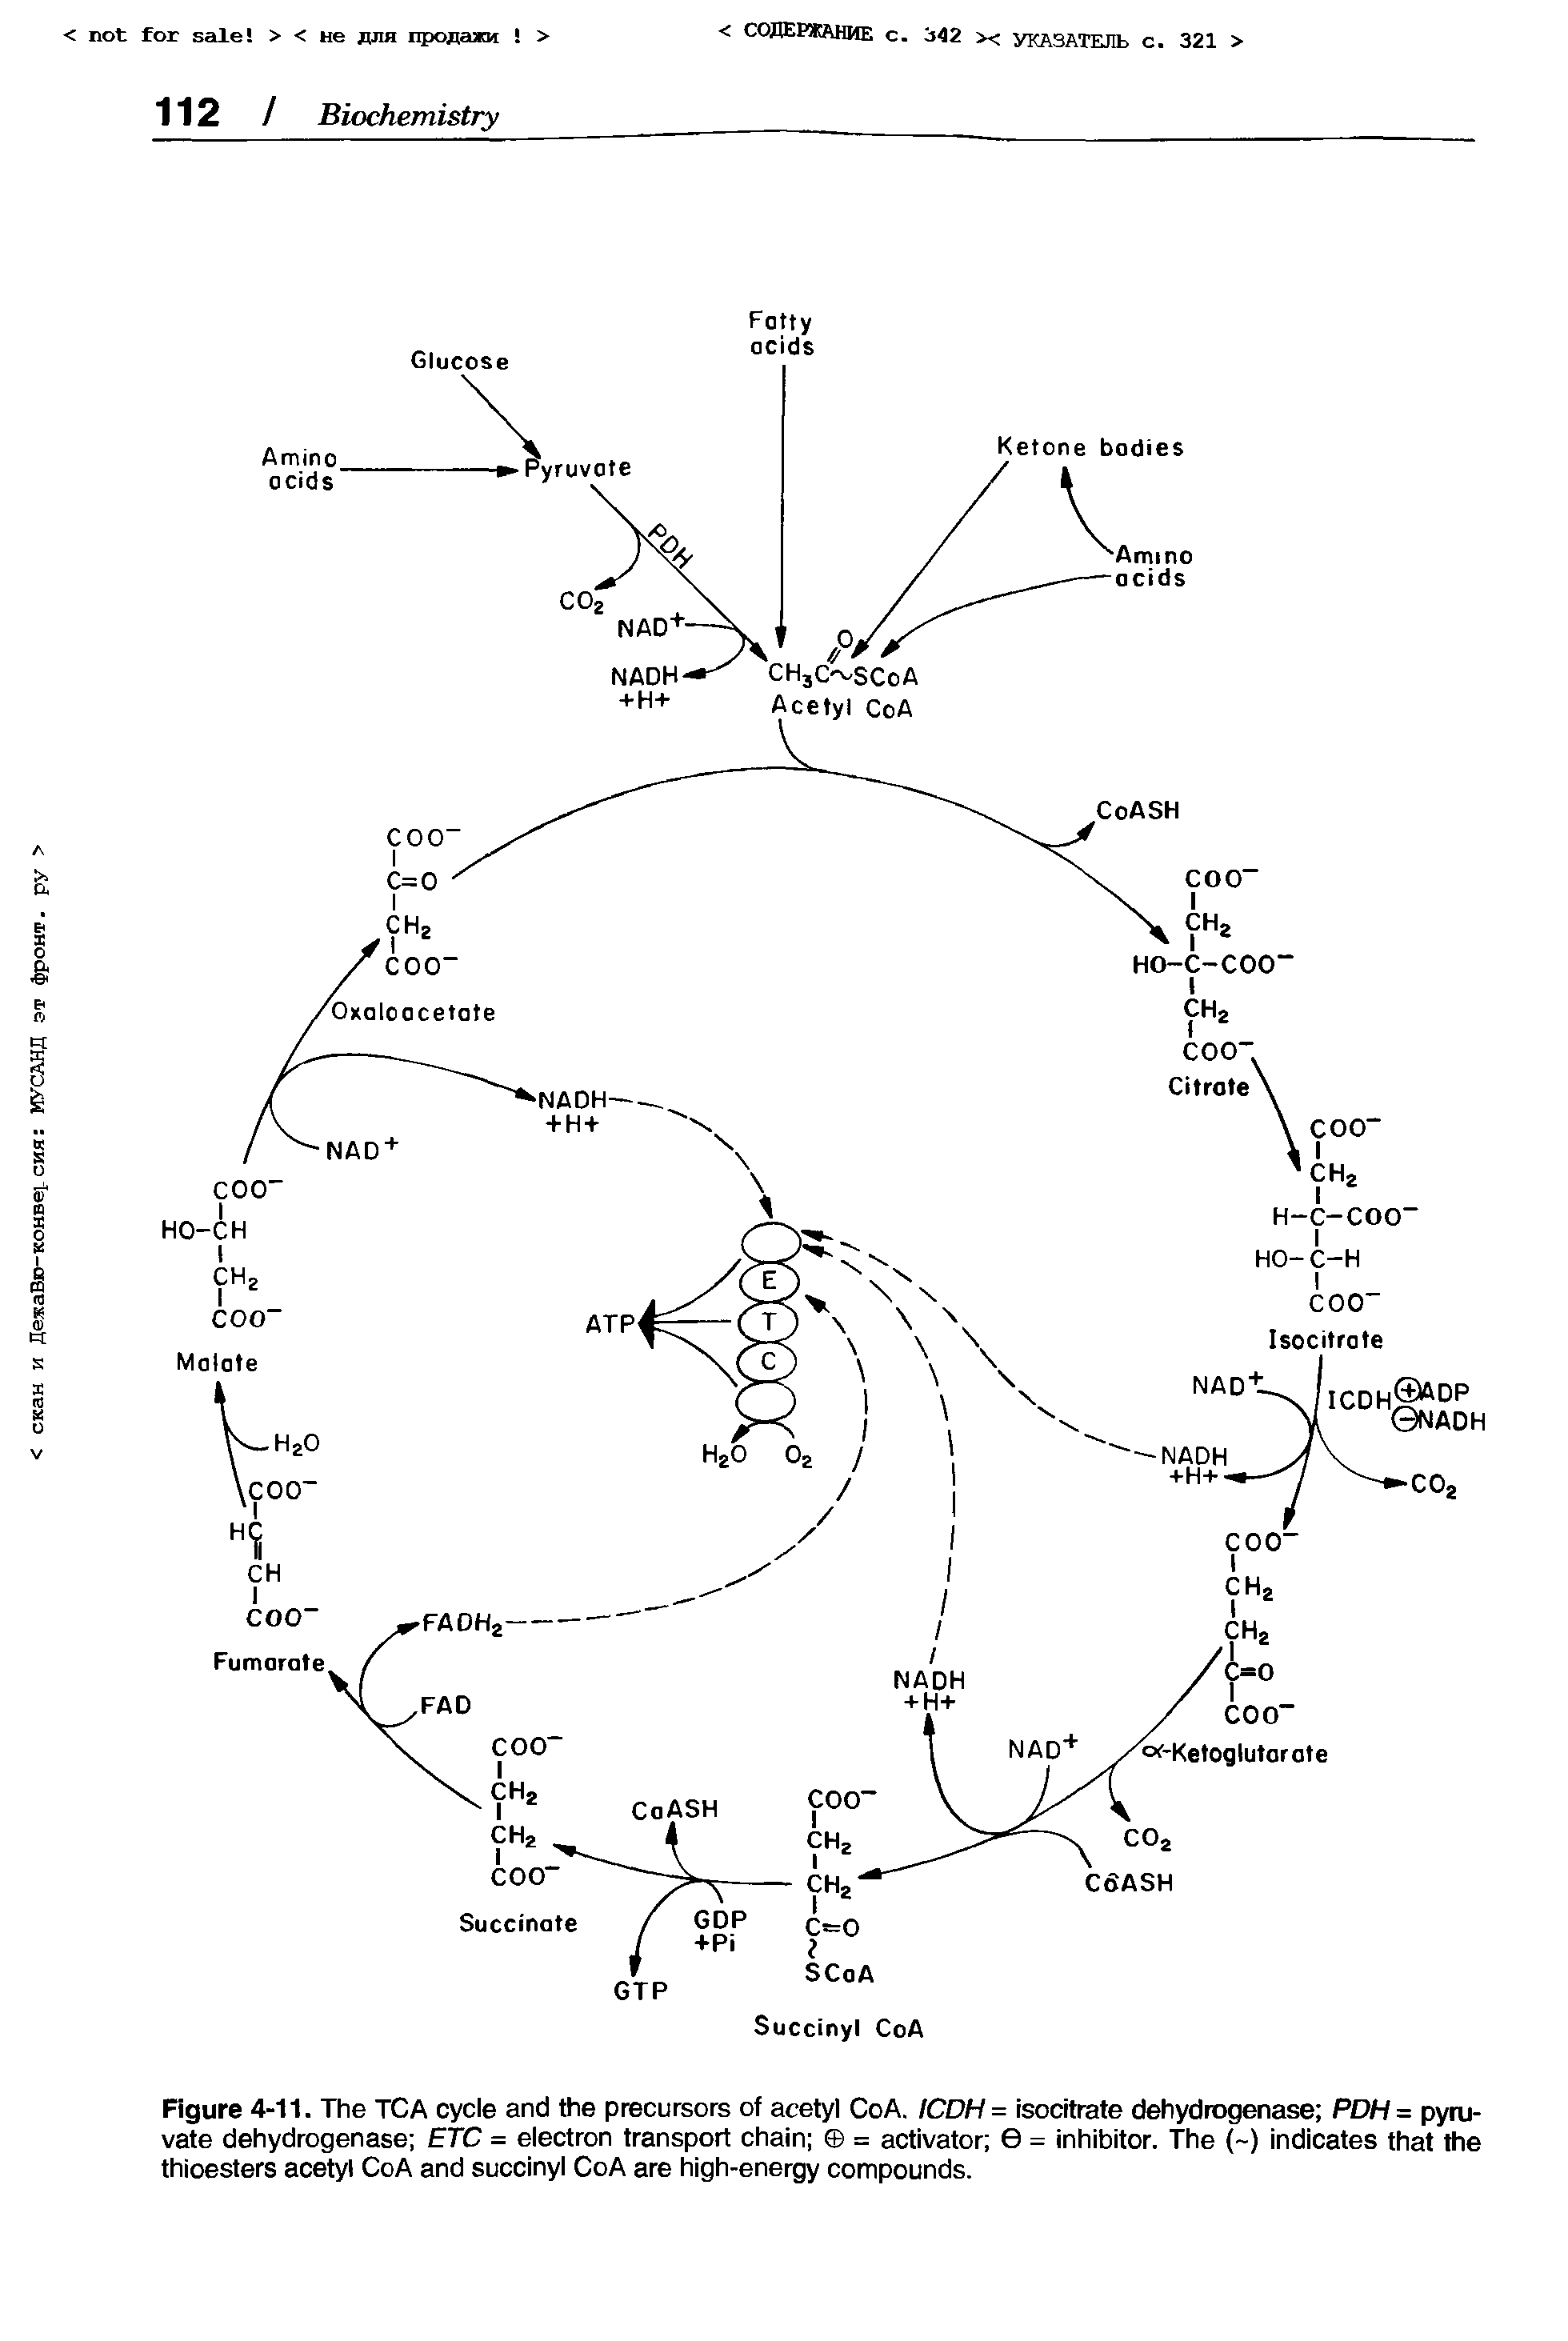 Figure 4-11. The TCA cycle and the precursors of acetyl CoA. ICDH = isocitrate dehydrogenase PDH= pyruvate dehydrogenase ETC = electron transport chain = activator 0 = inhibitor. The ( ) indicates that the thioesters acetyl CoA and succinyl CoA are high-energy compounds.